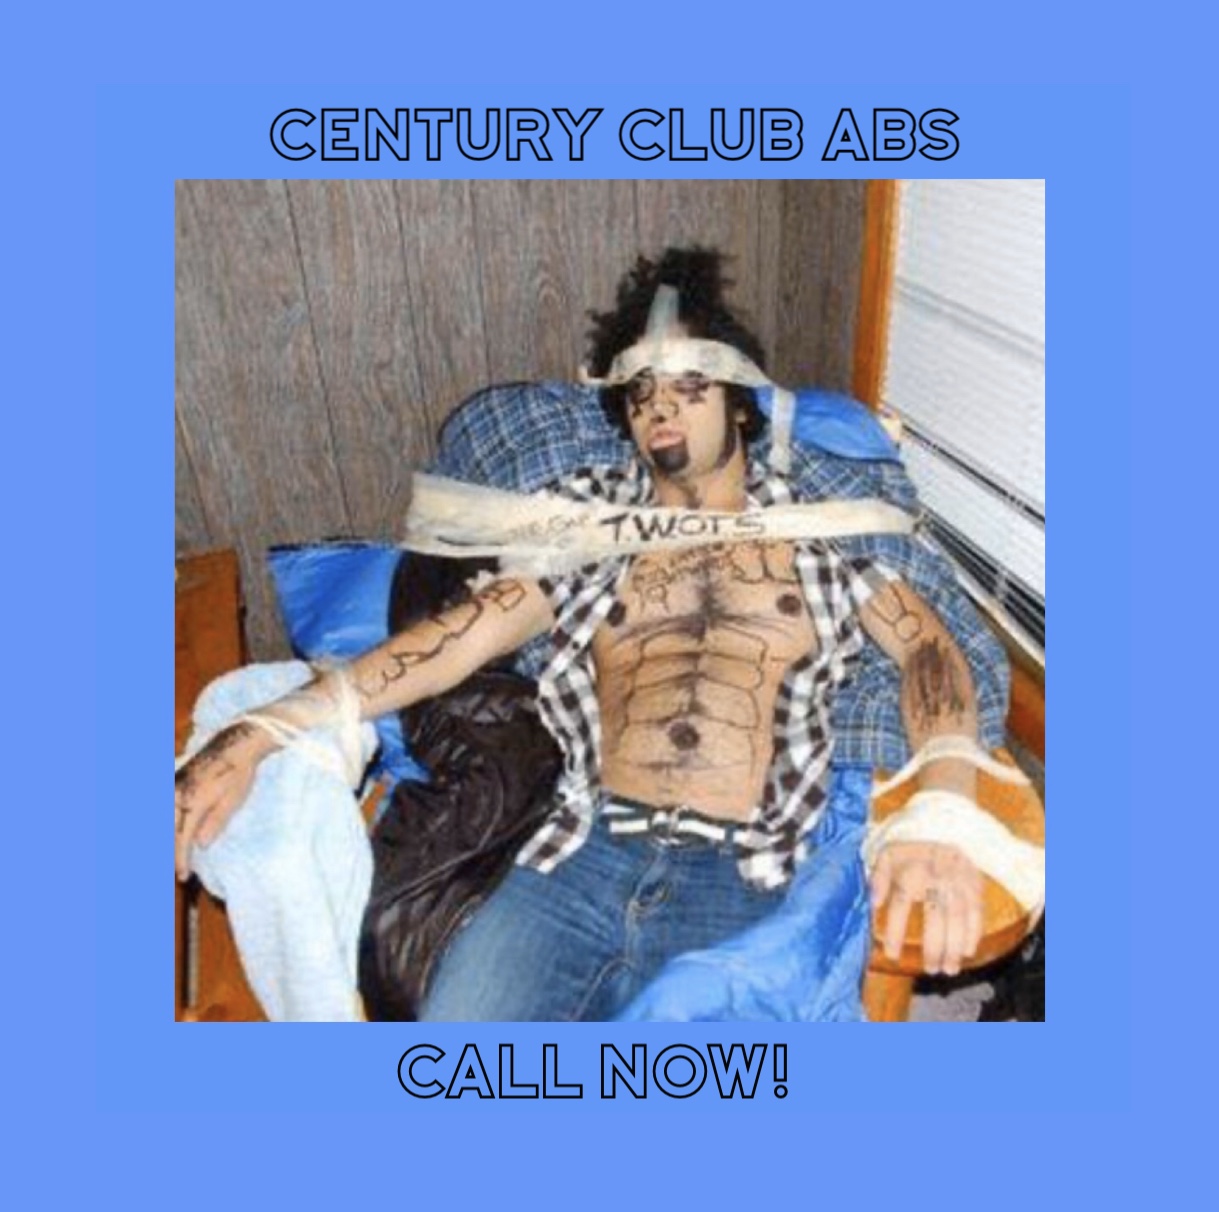 human - Century Club Abs Twot Call Now!